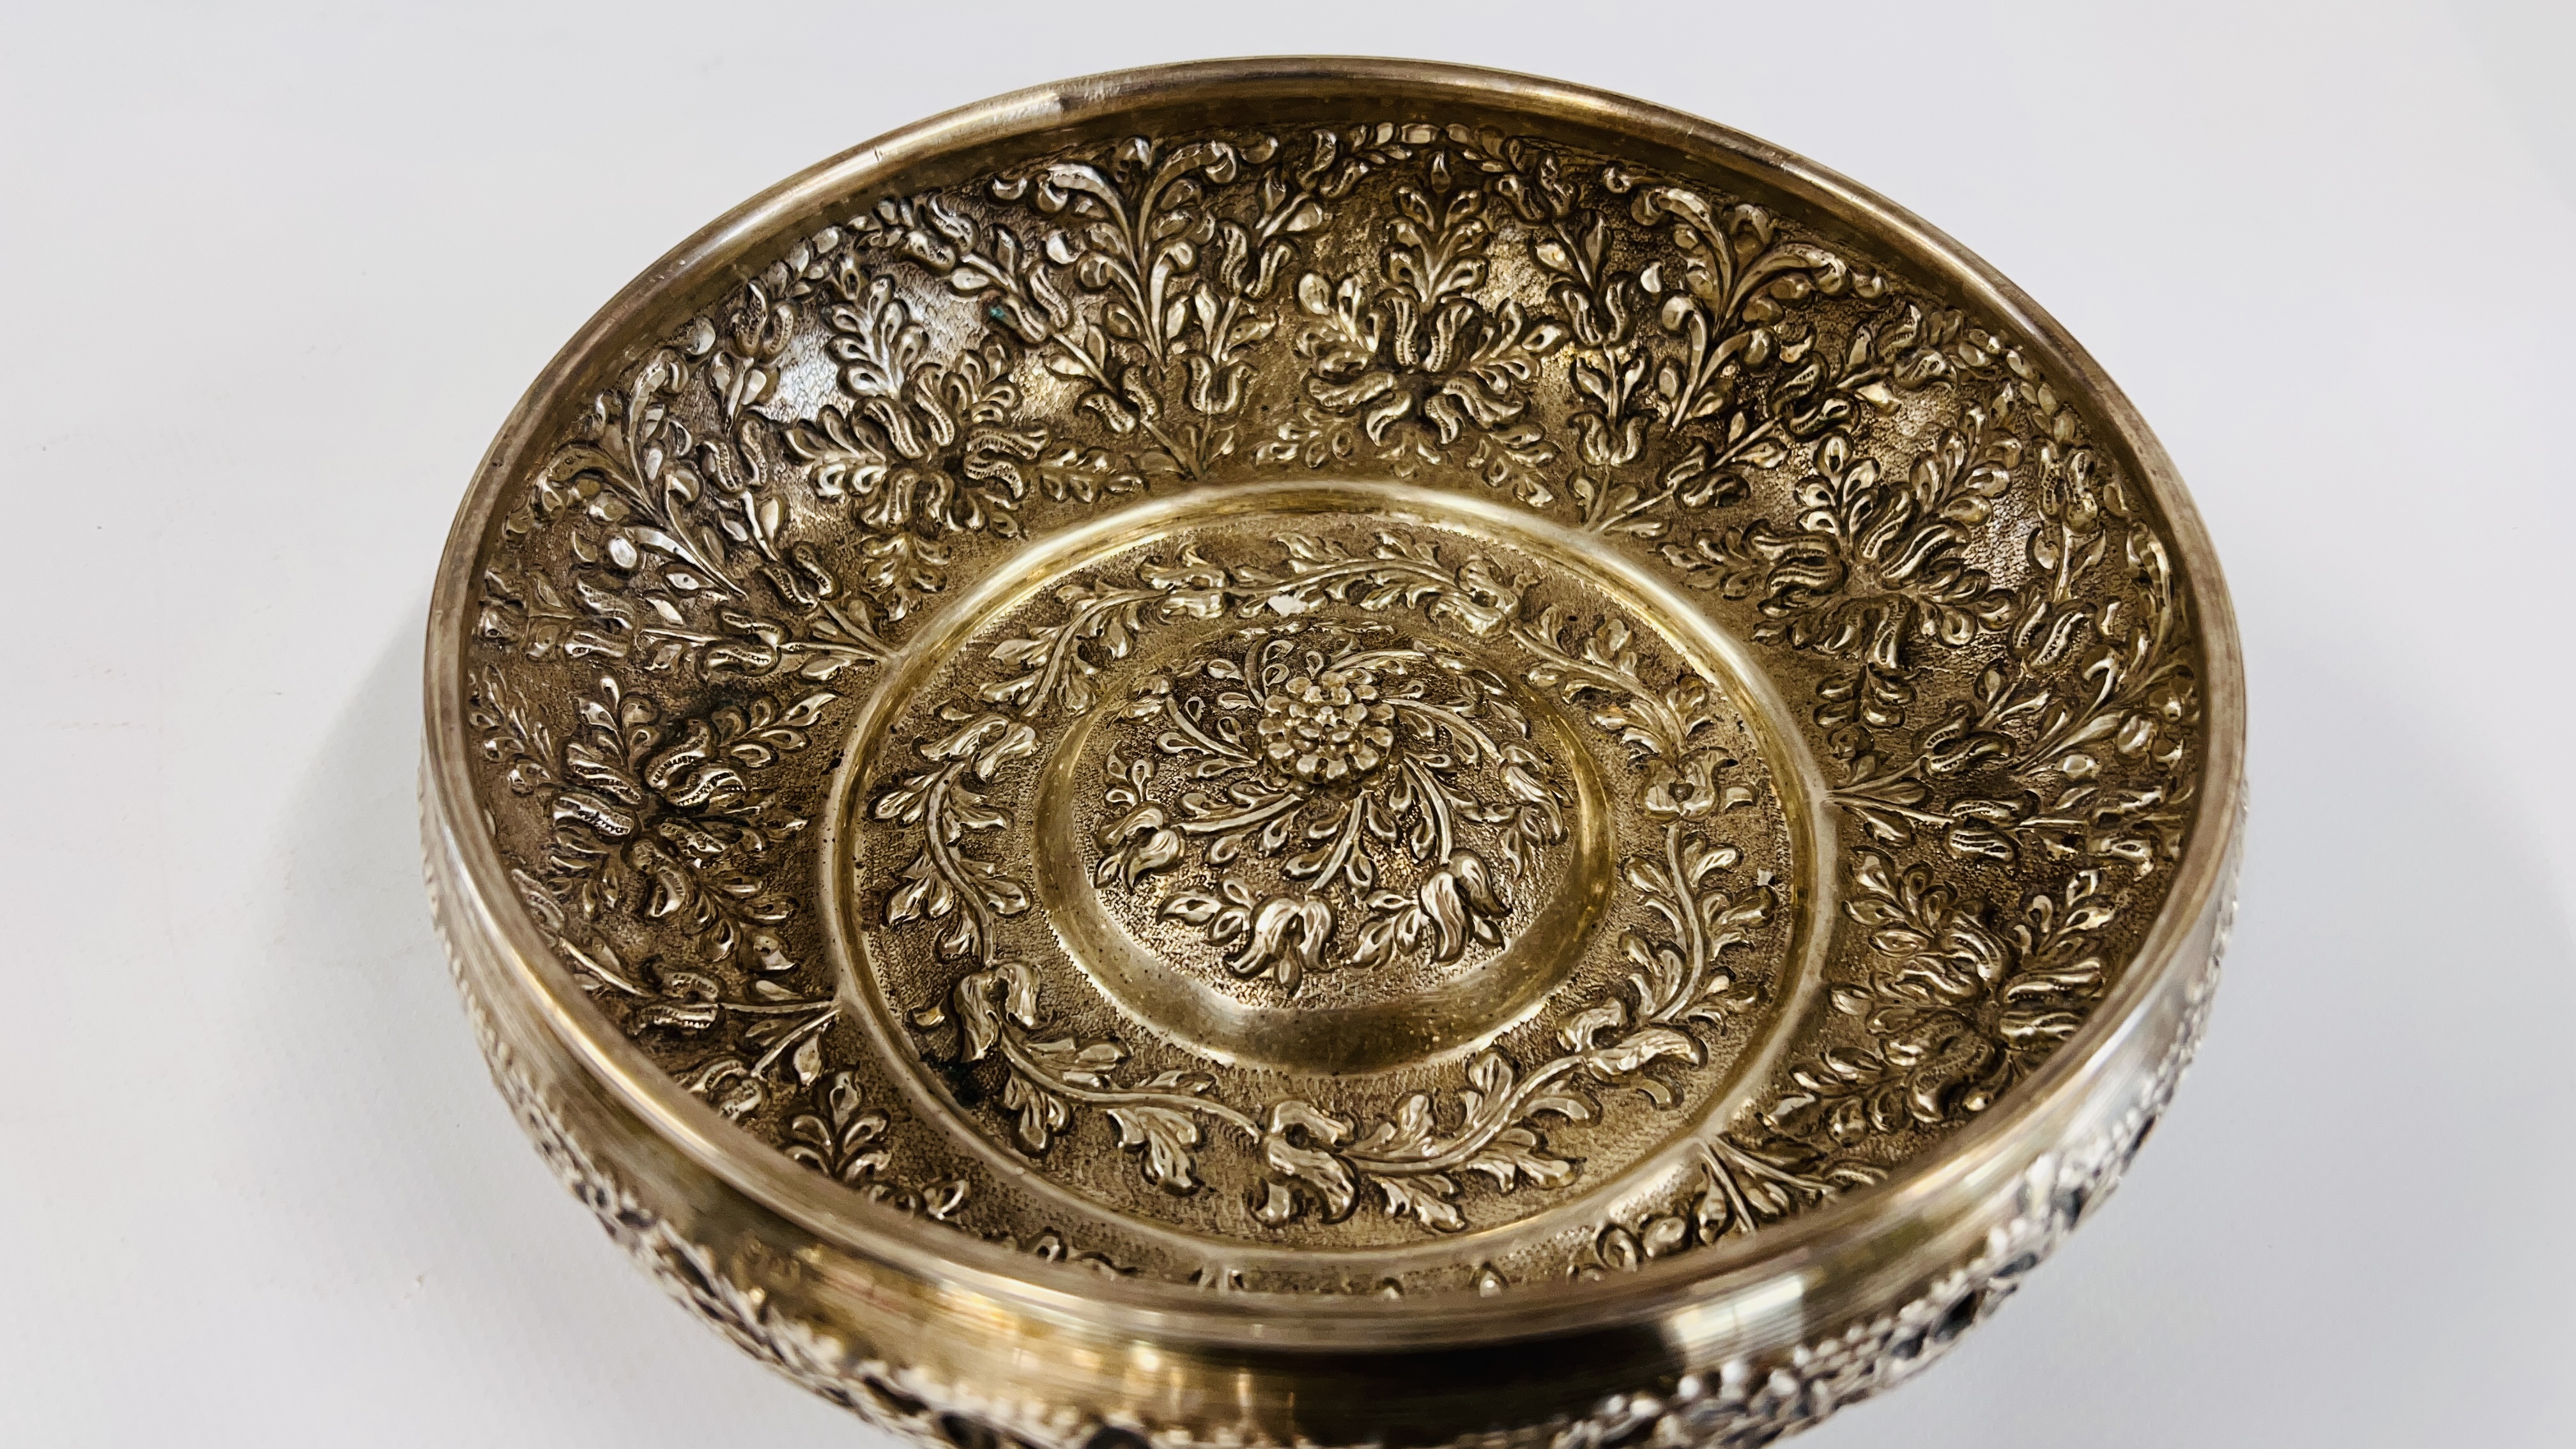 AN EASTERN OTTOMAN WHITE METAL REPOUSSED ITAMAM BOWL MARKED 900, DIA. 20CM X H. 6CM. - Image 2 of 5